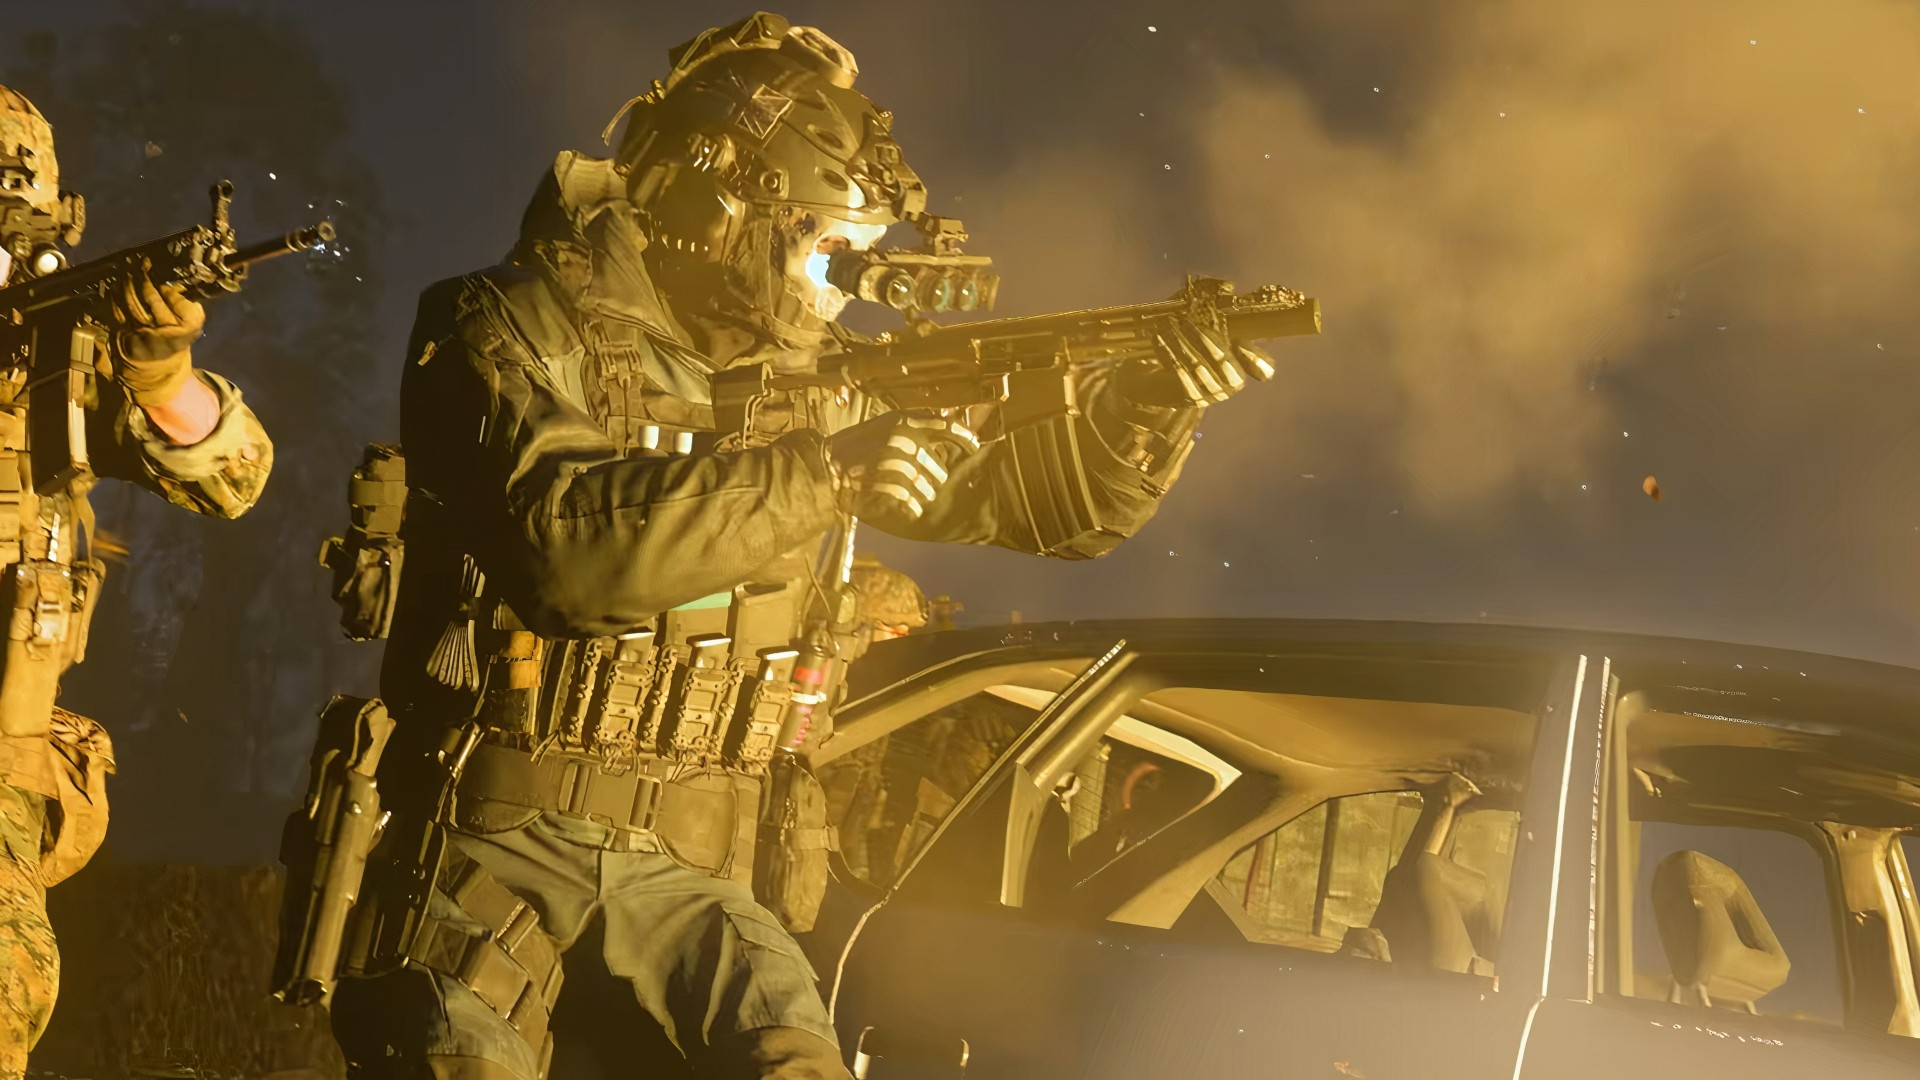 Modern Warfare 2 isn't just for Call of Duty pros, and that's great